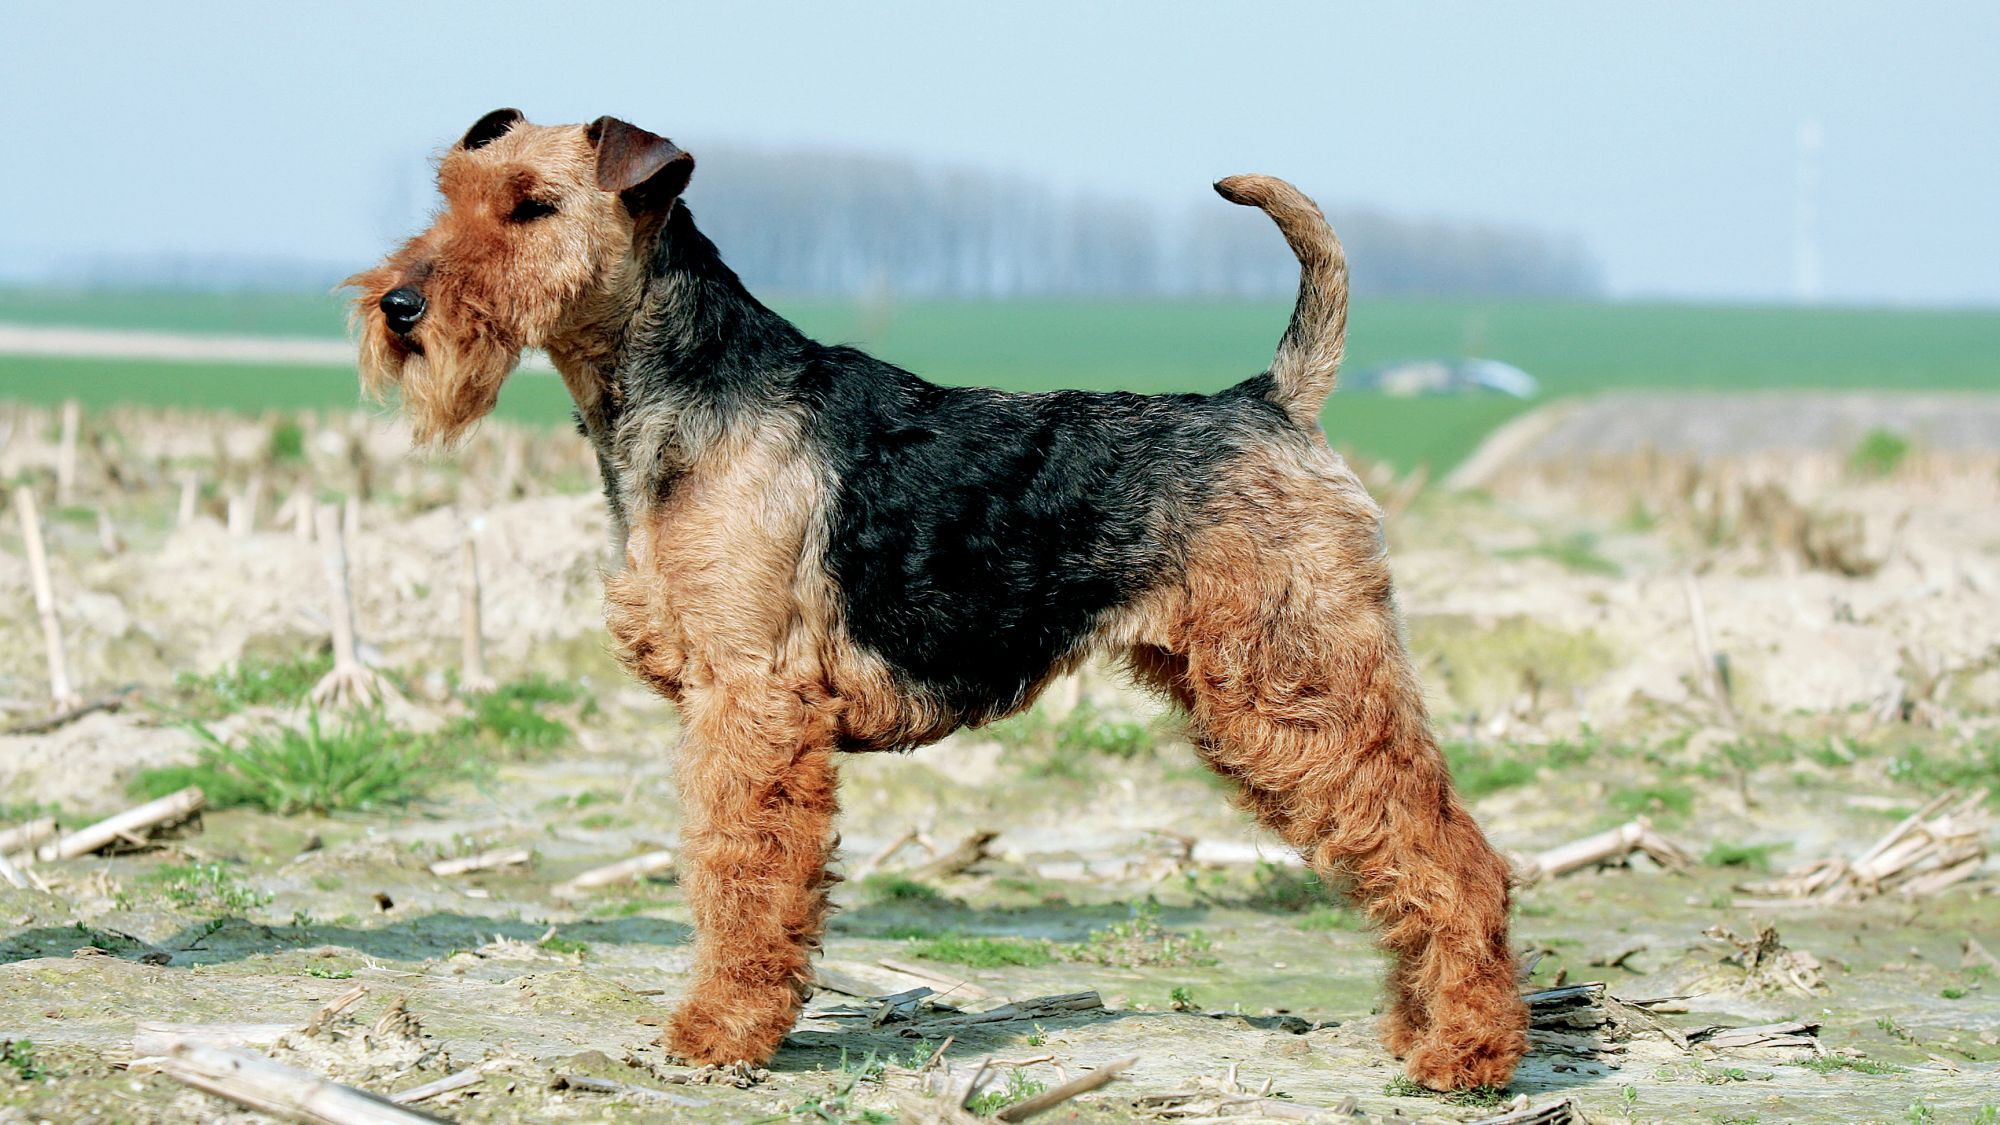 Side view of Welsh Terrier standing on sand and dried grass